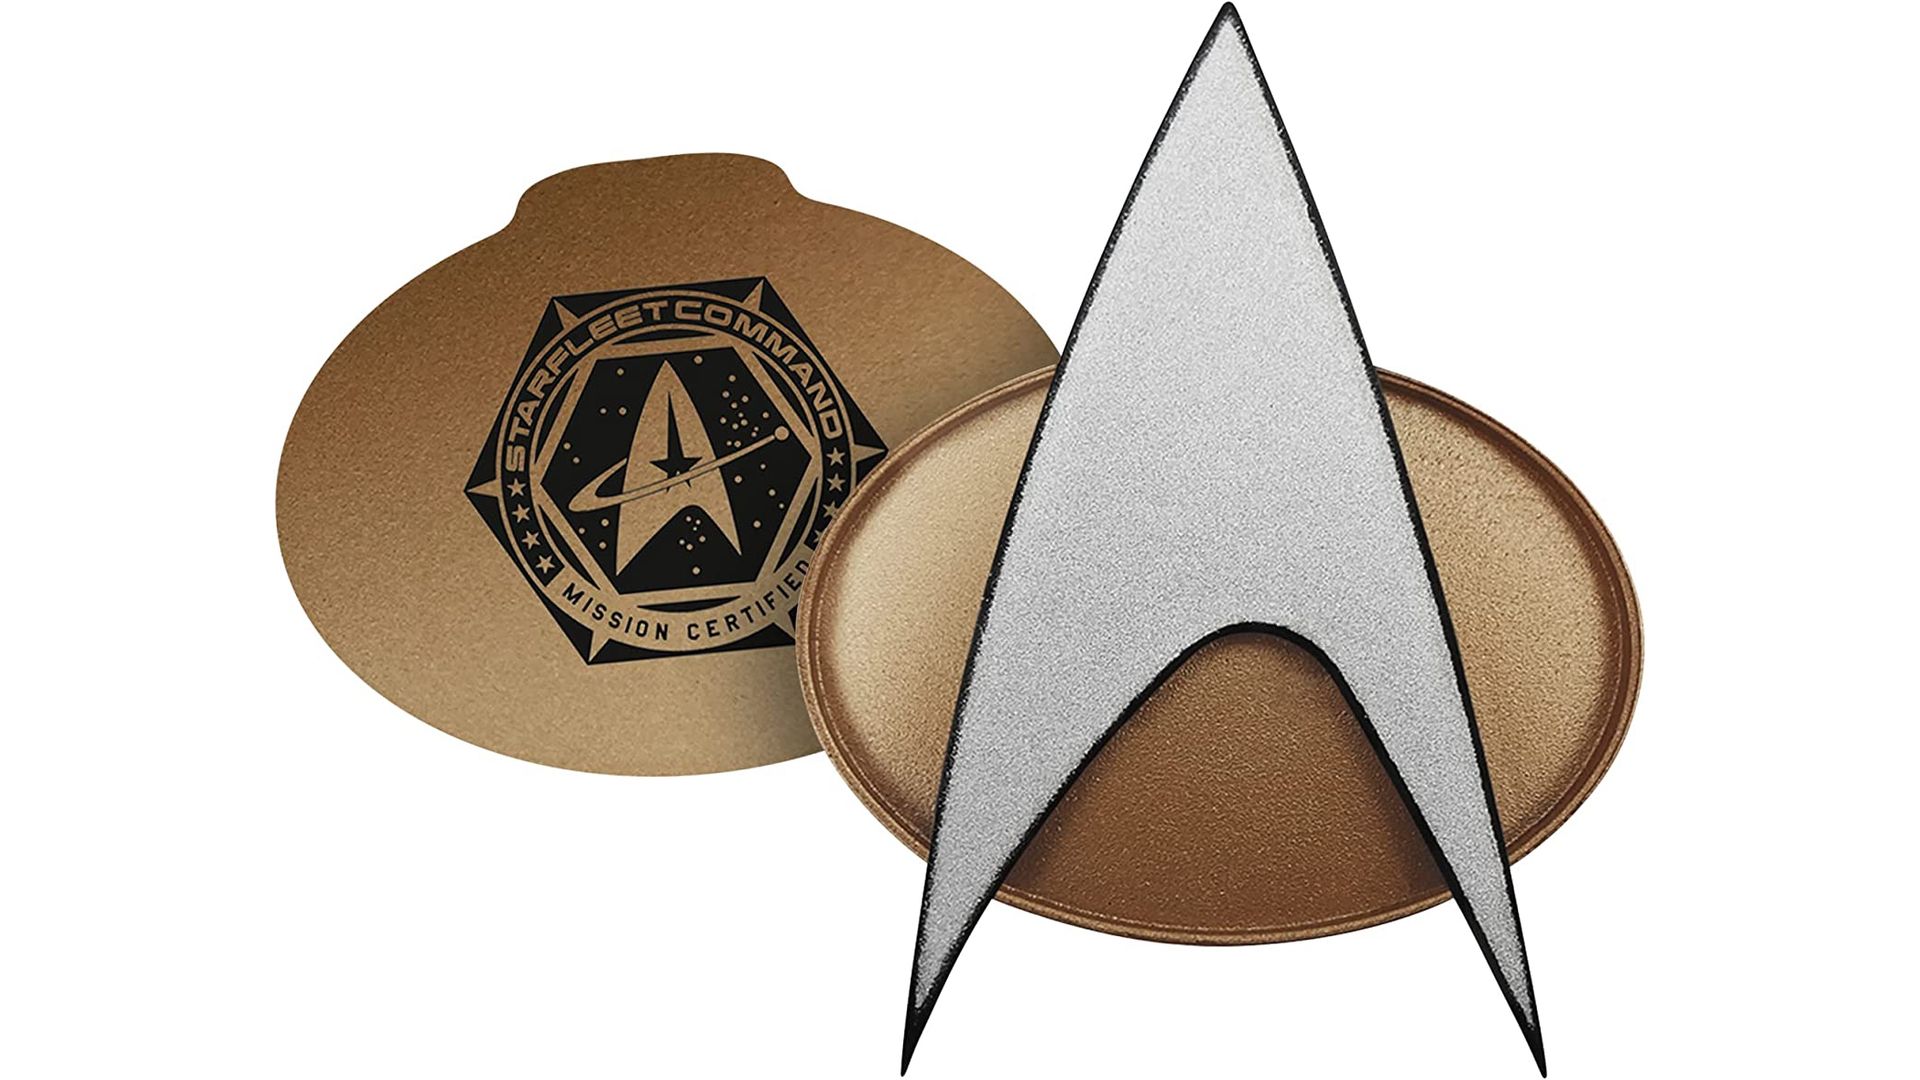 A Star Trek: The Next Generation combadge on a white background.